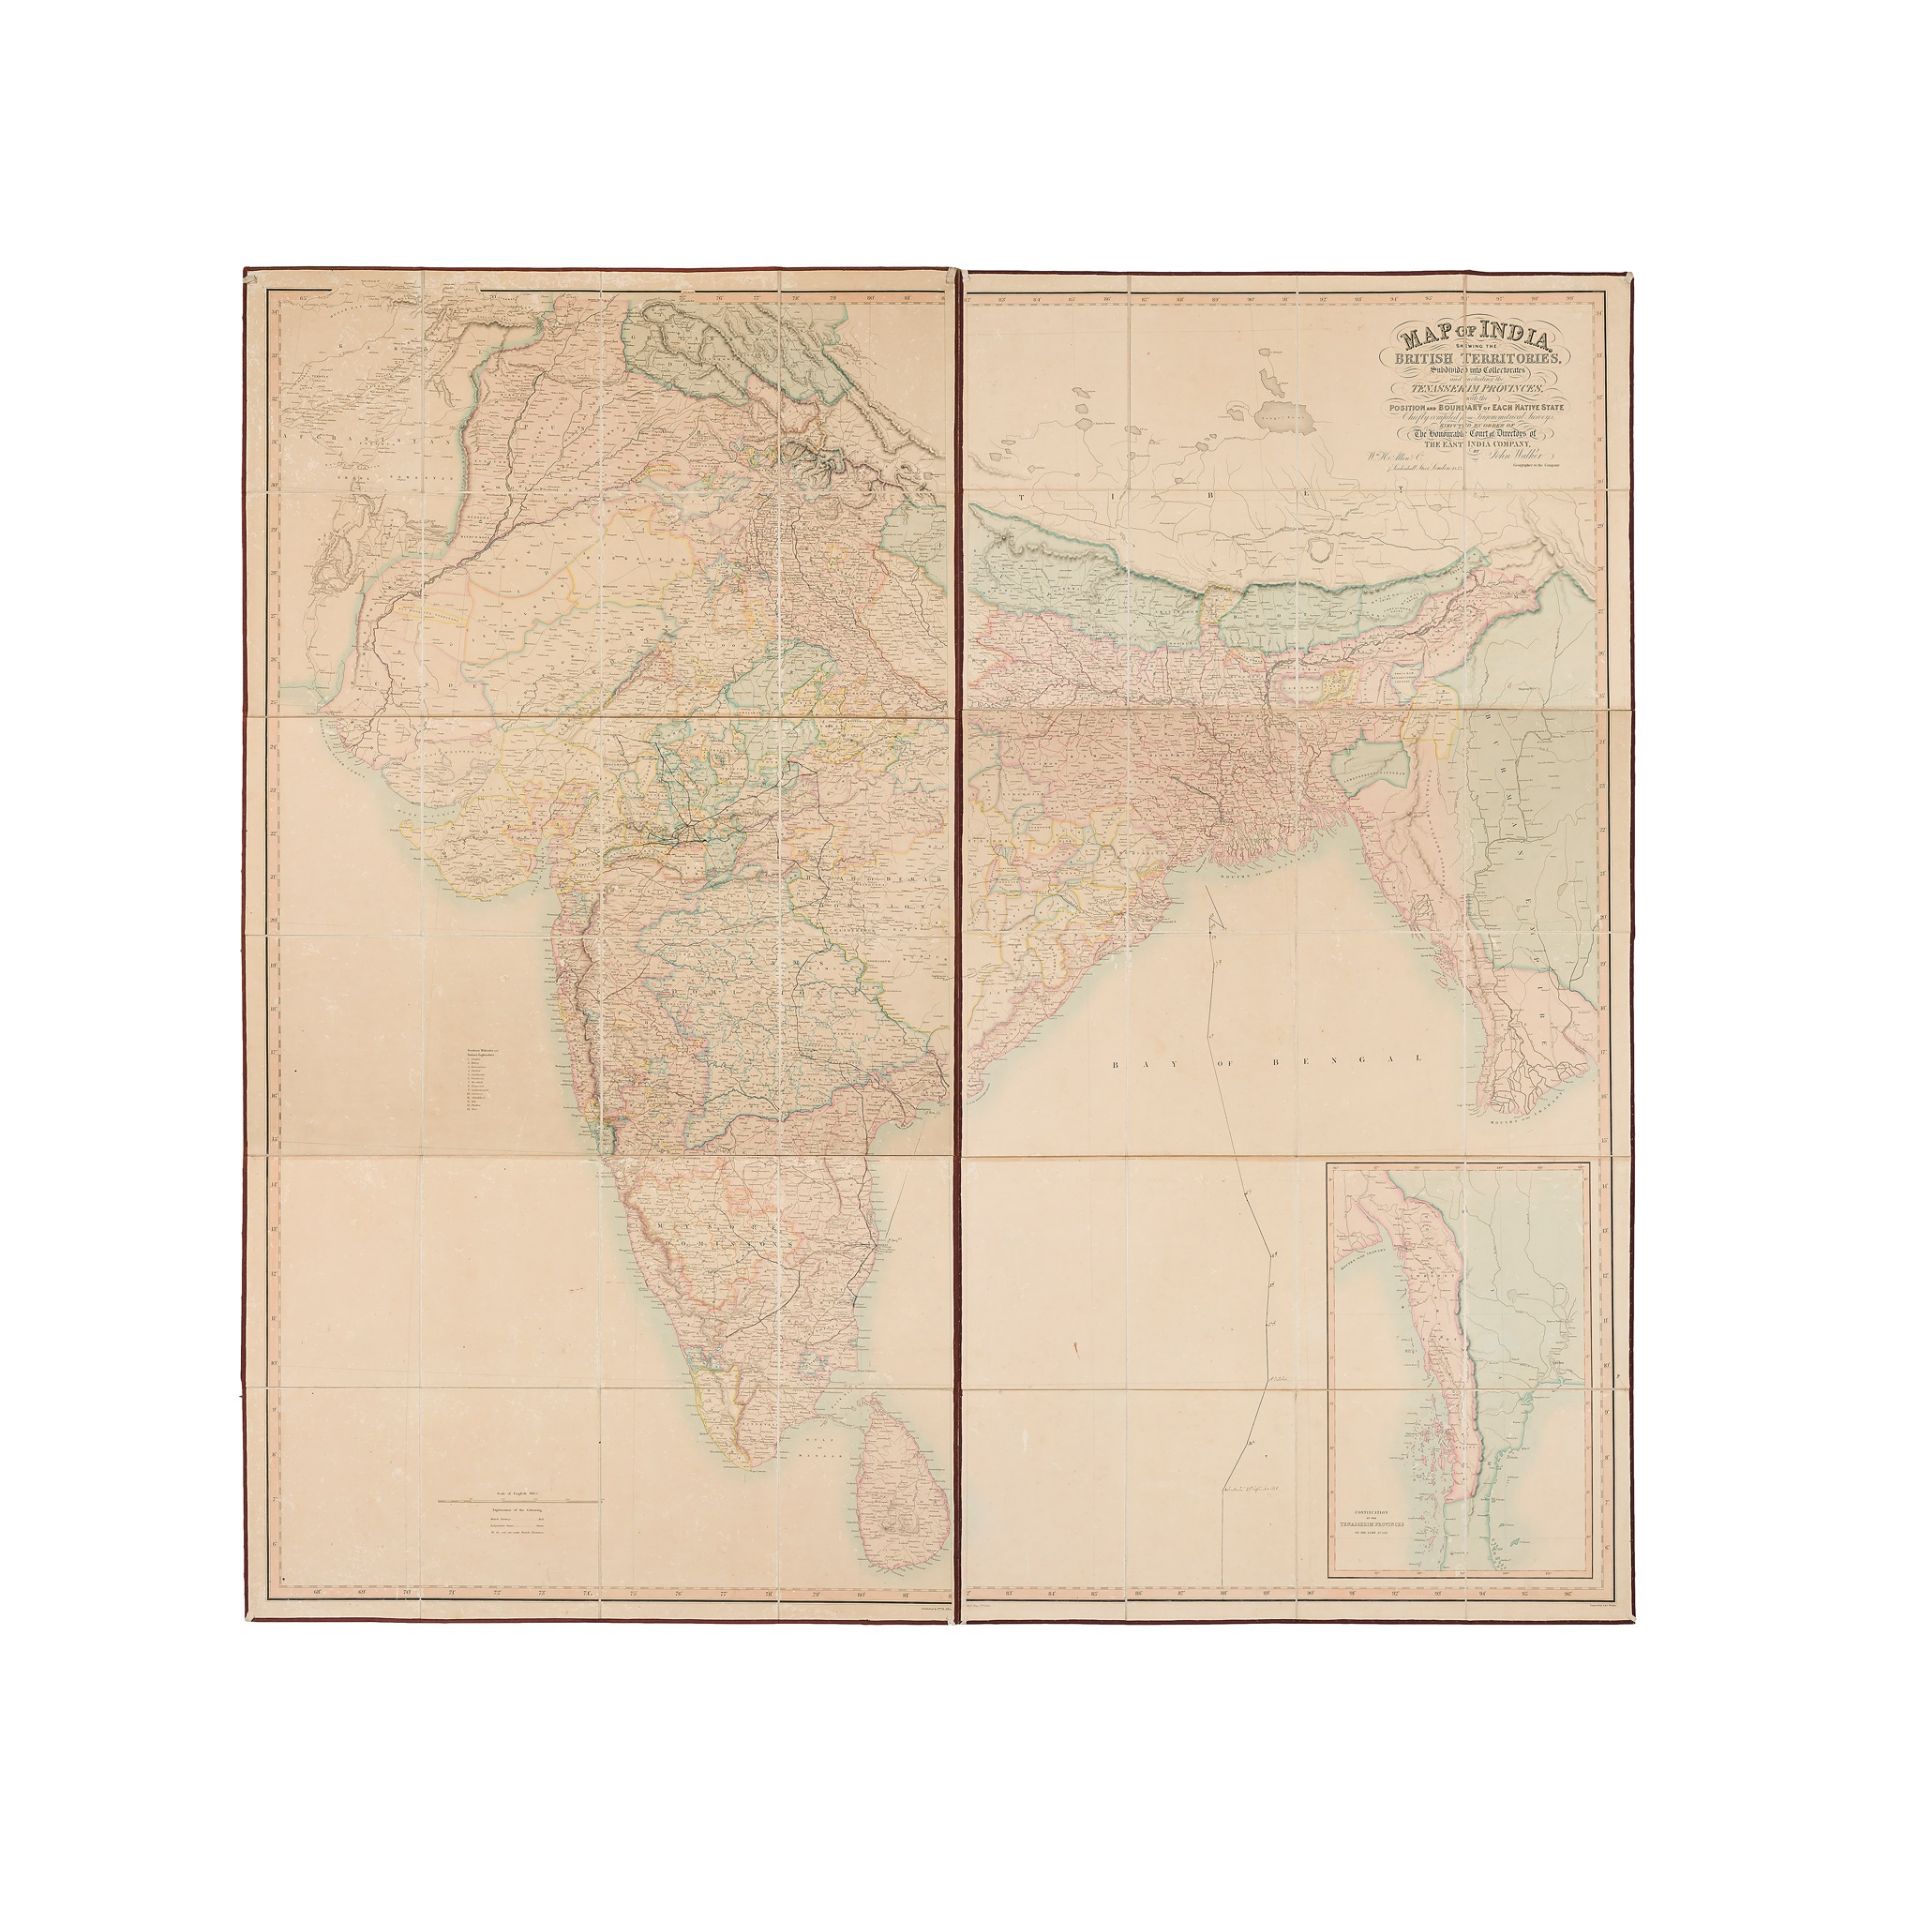 India - Walker, John, mapmaker to the East India Company Map of India, shewing the British